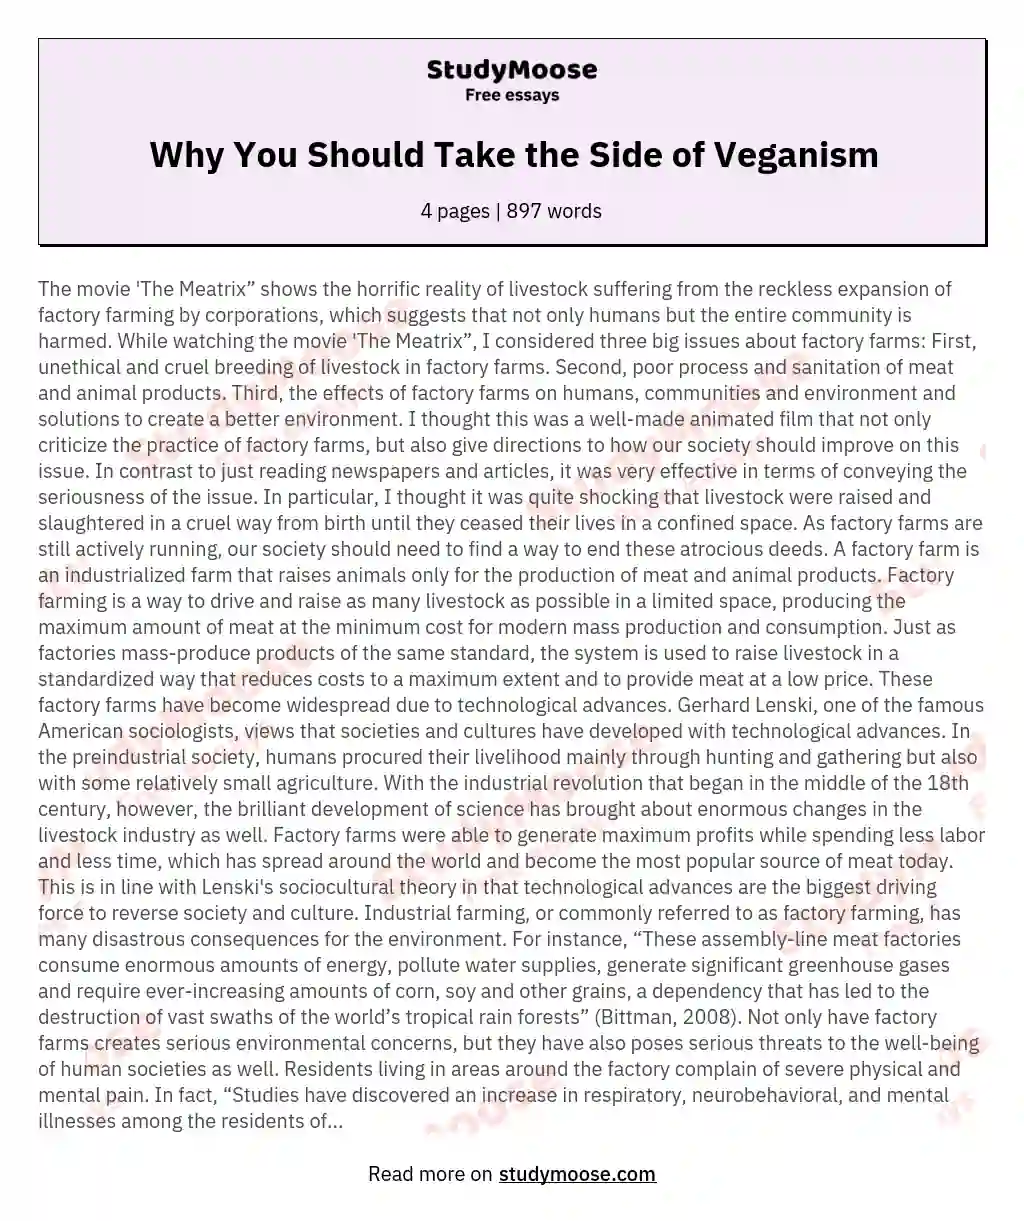 Why You Should Take the Side of Veganism essay